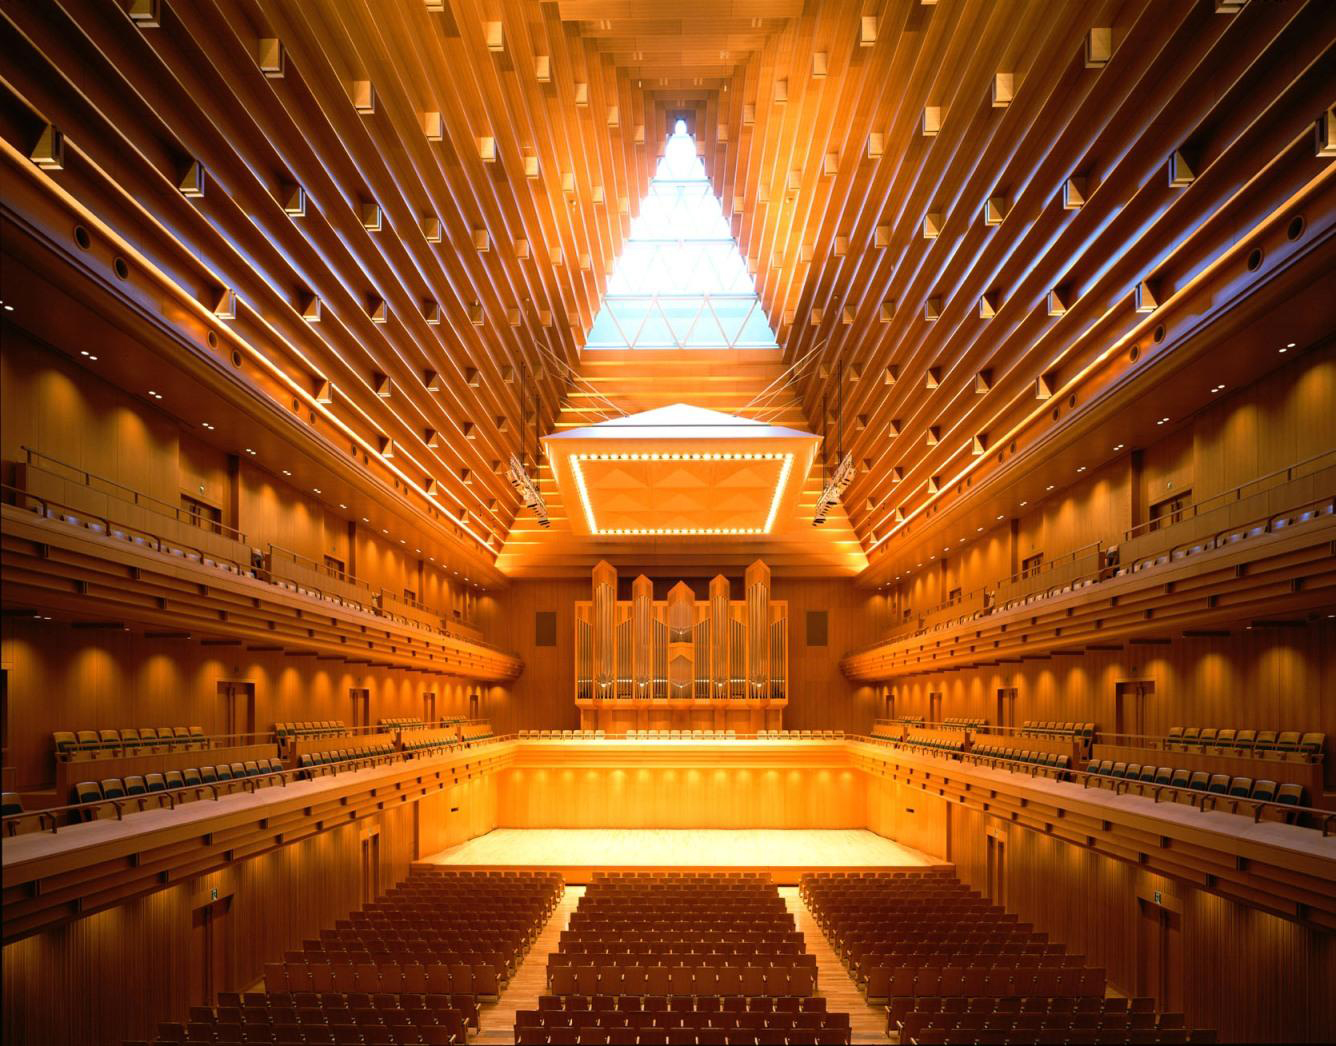 21 of the world’s most beautiful concert halls